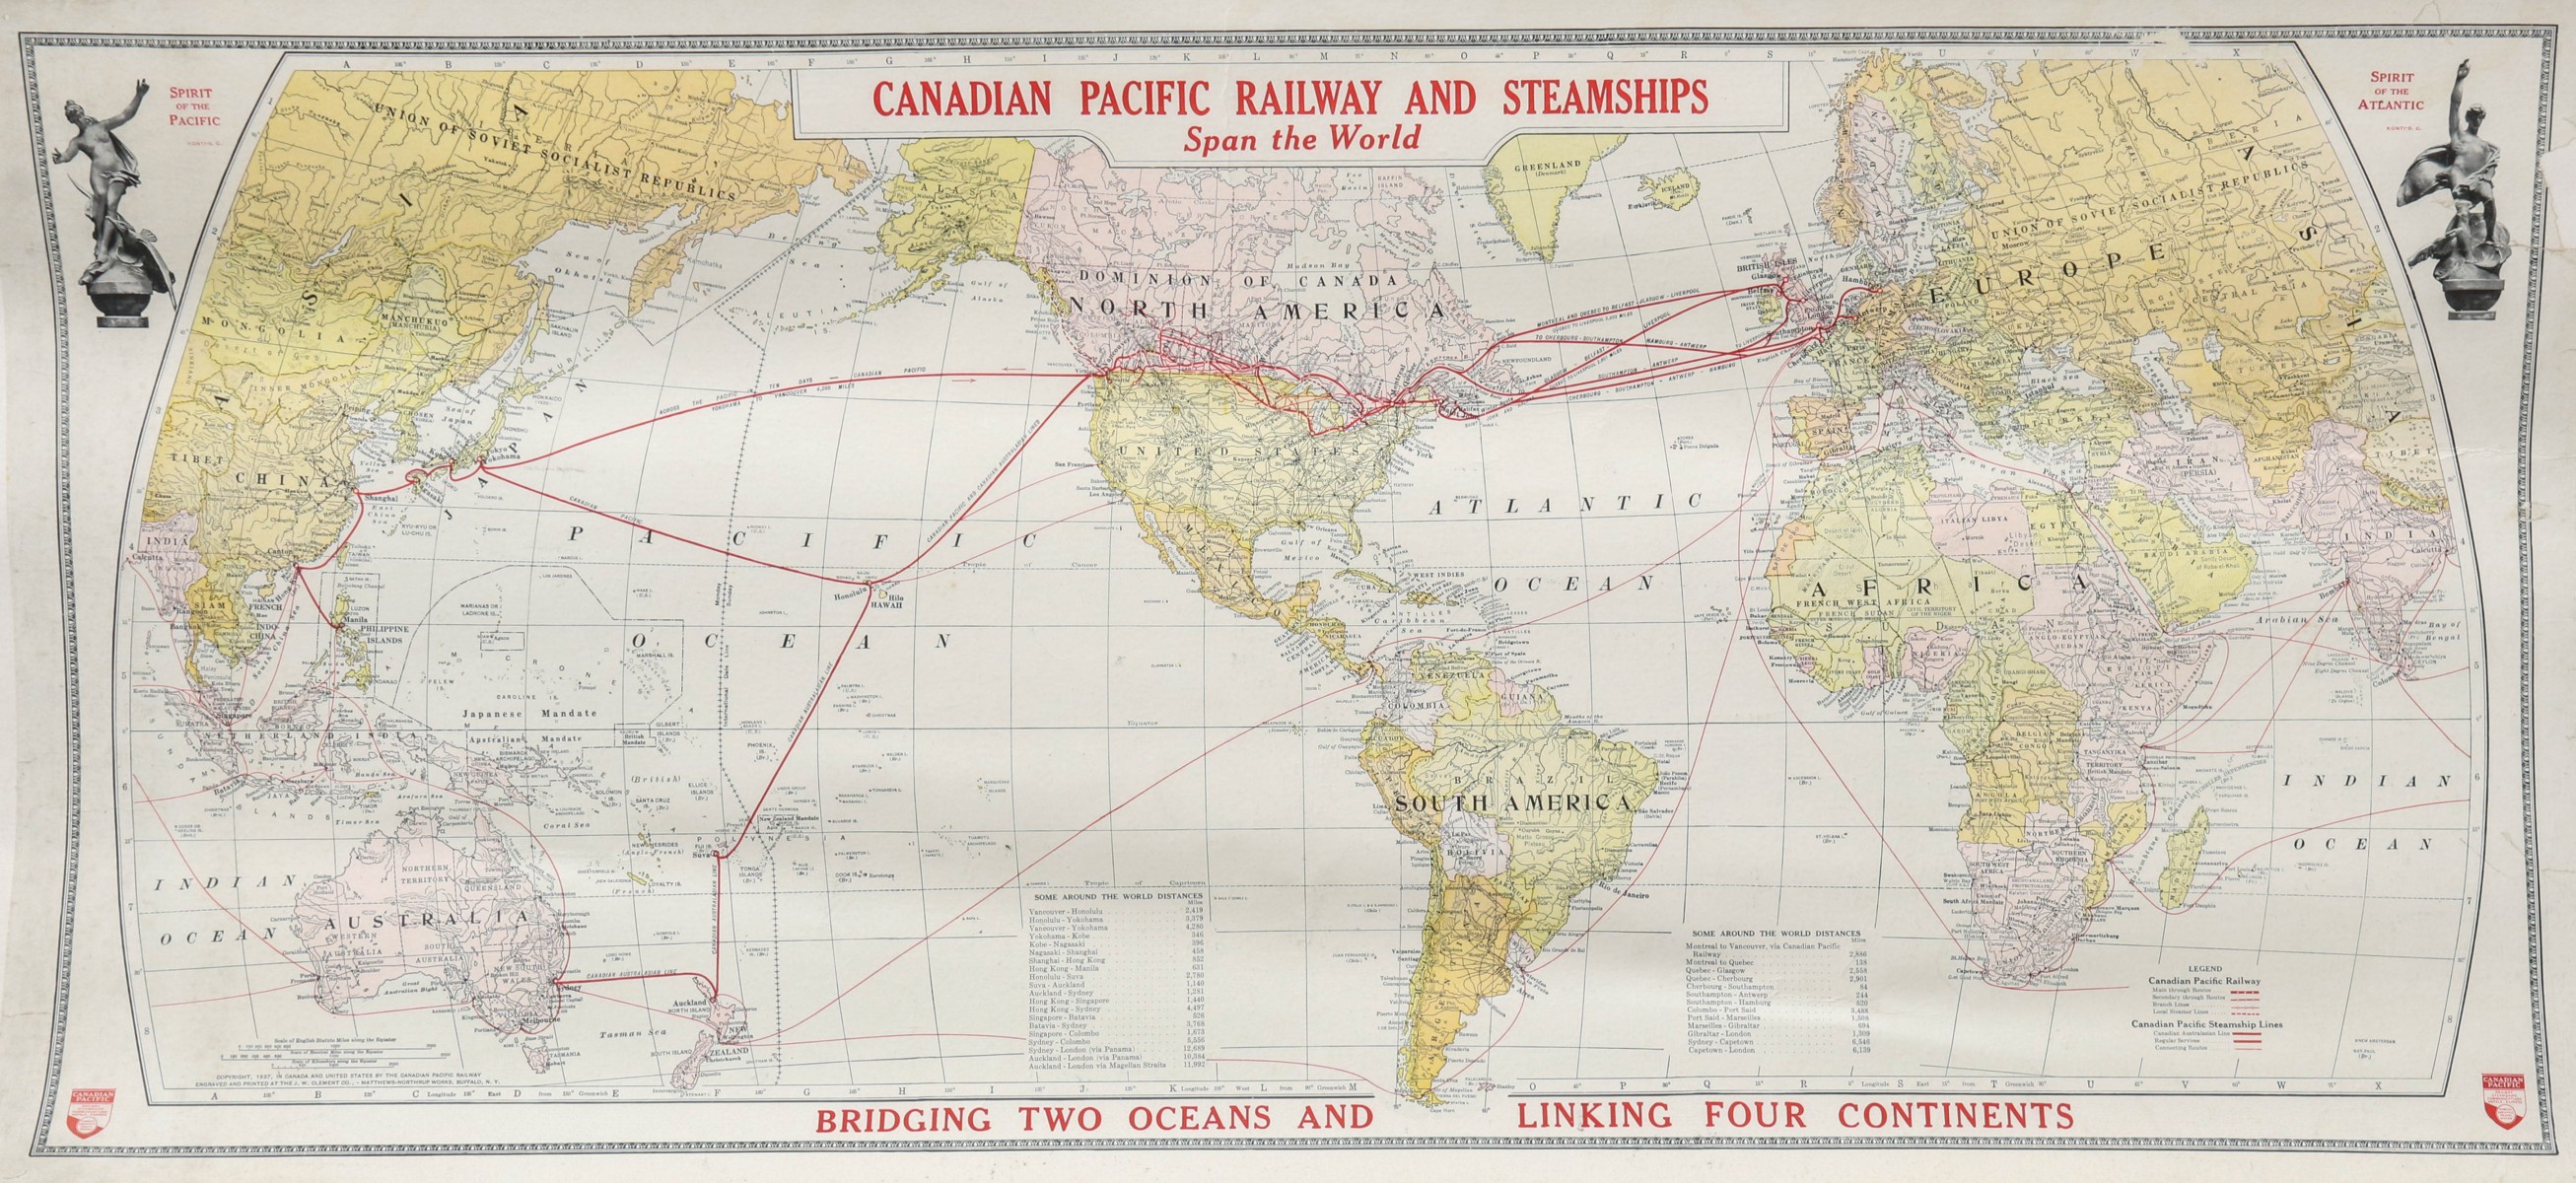 A 1937 CANADIAN PACIFIC RAILWAY AND STEAMSHIP MAP